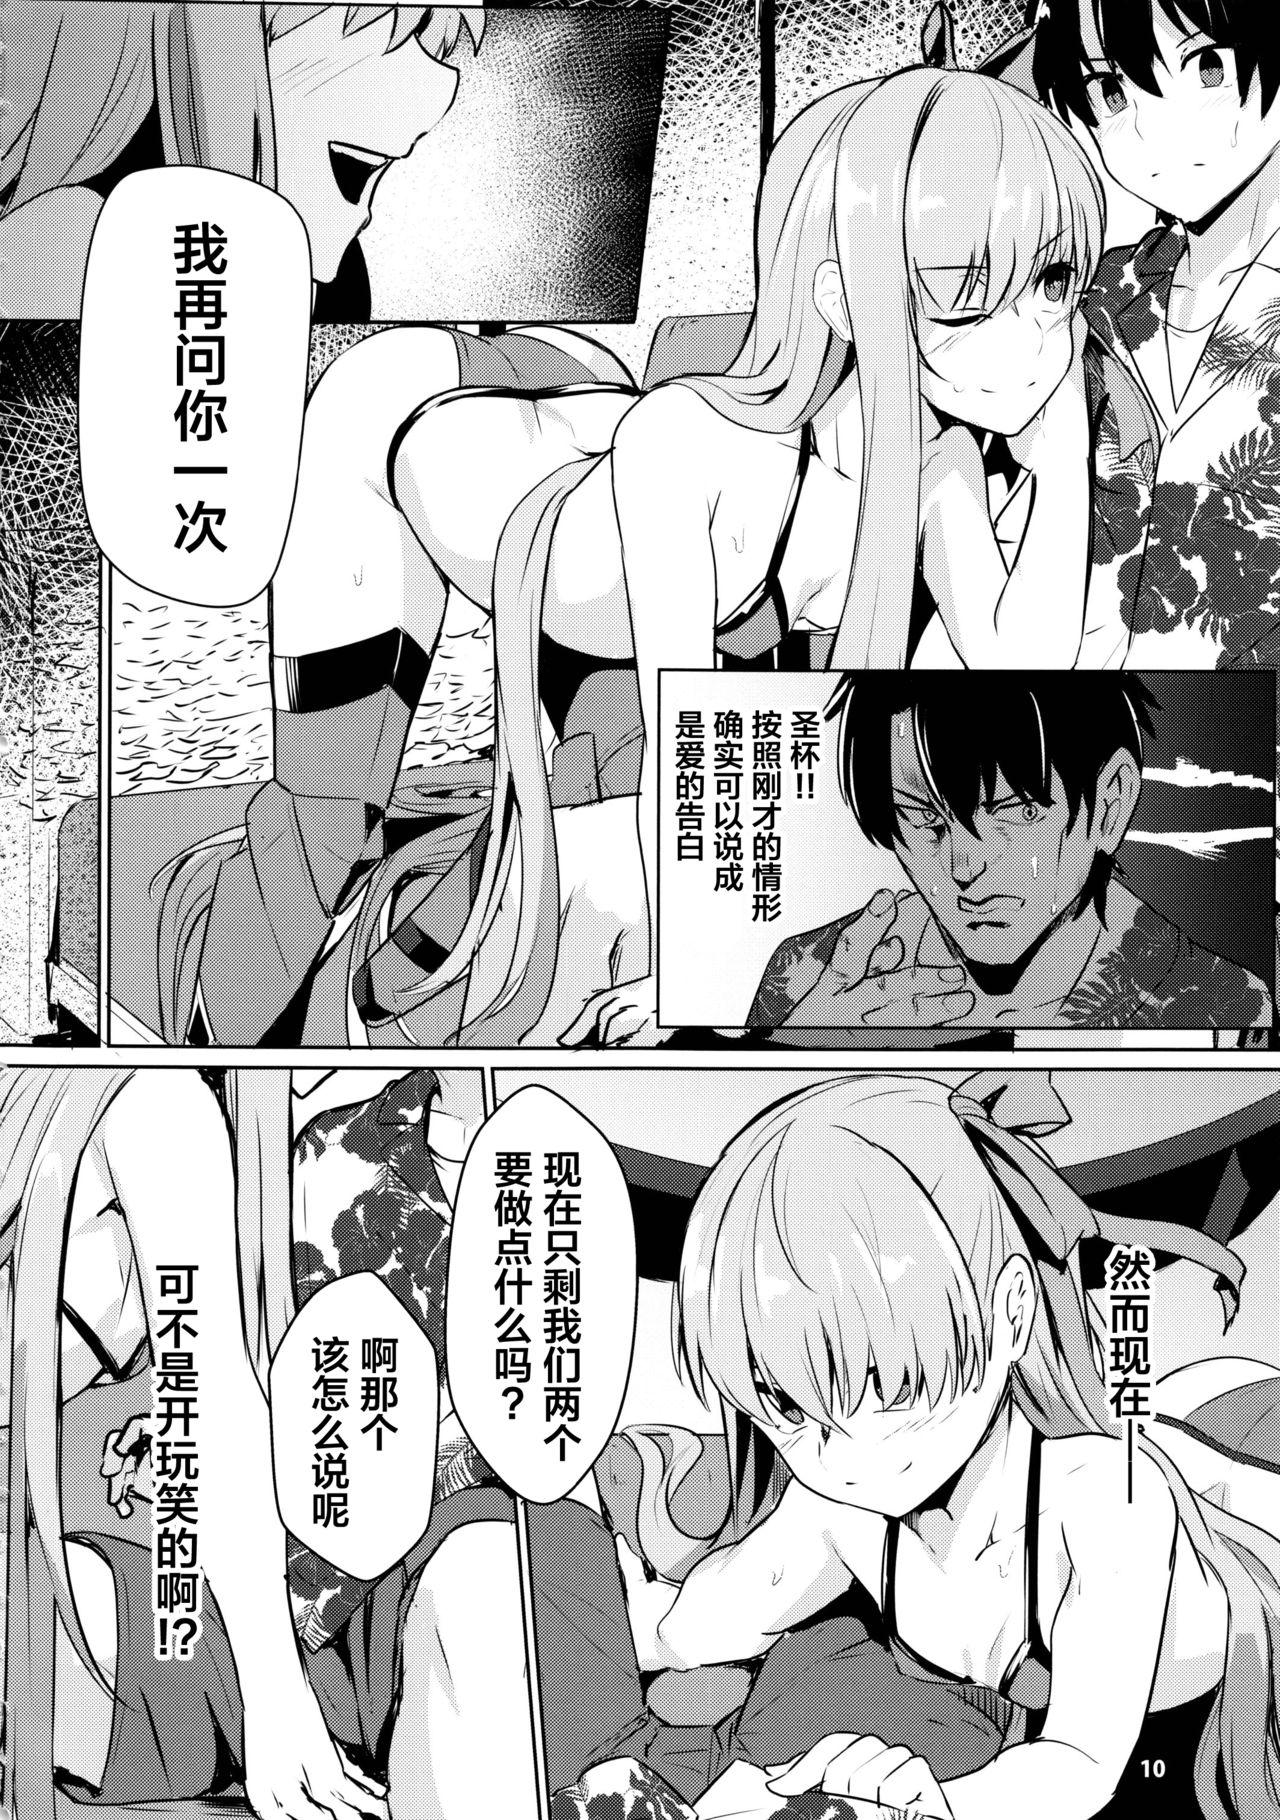 Sola Sabahon in case of Meltryllis - Fate grand order Hot Women Having Sex - Page 12